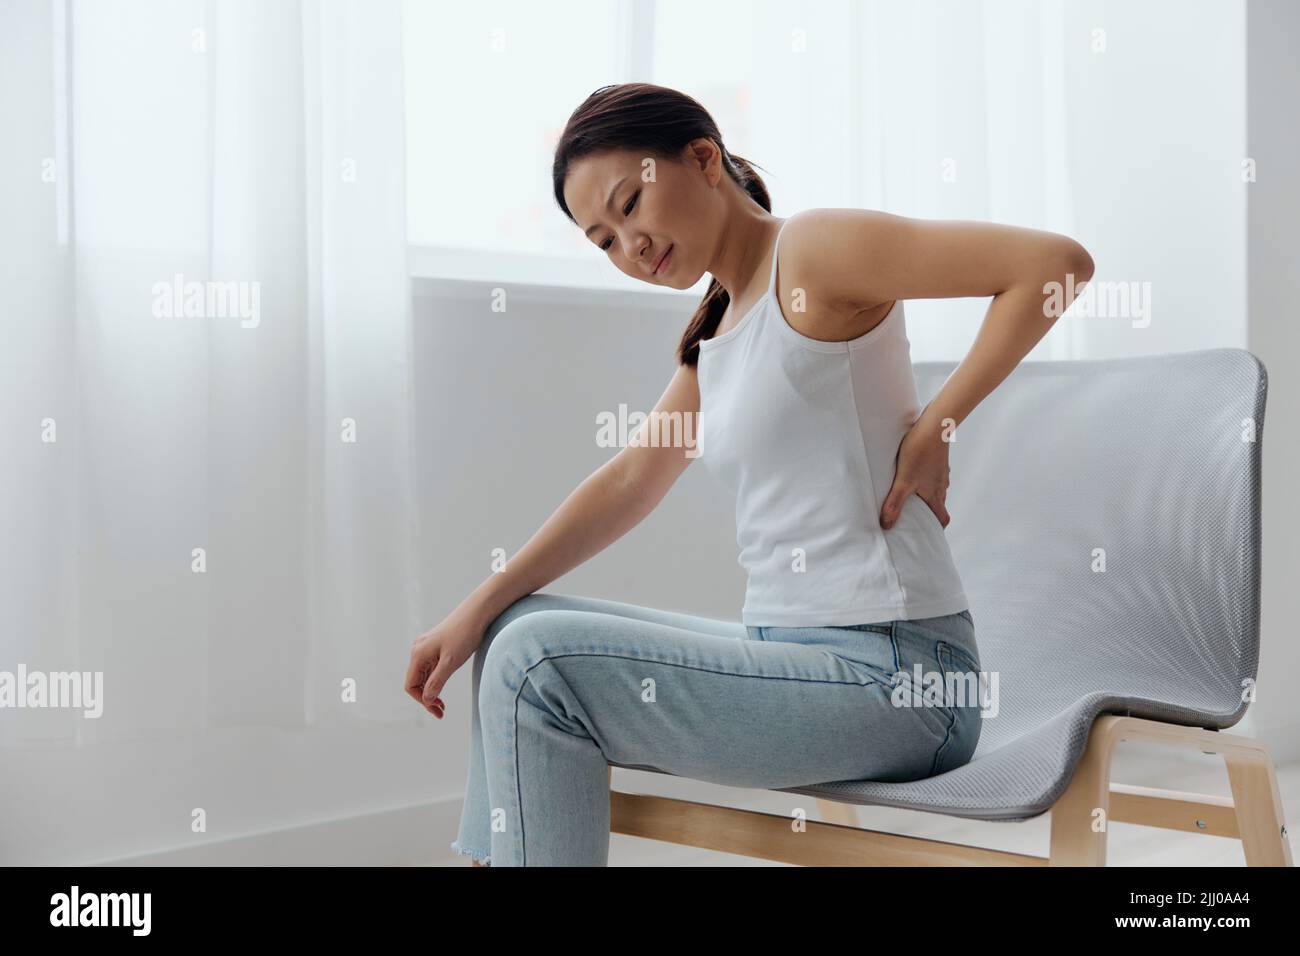 Suffering from scoliosis osteochondrosis after long study pretty young  Asian woman feel hurt joint back pain laptop in incorrect posture sit on  chair Stock Photo - Alamy